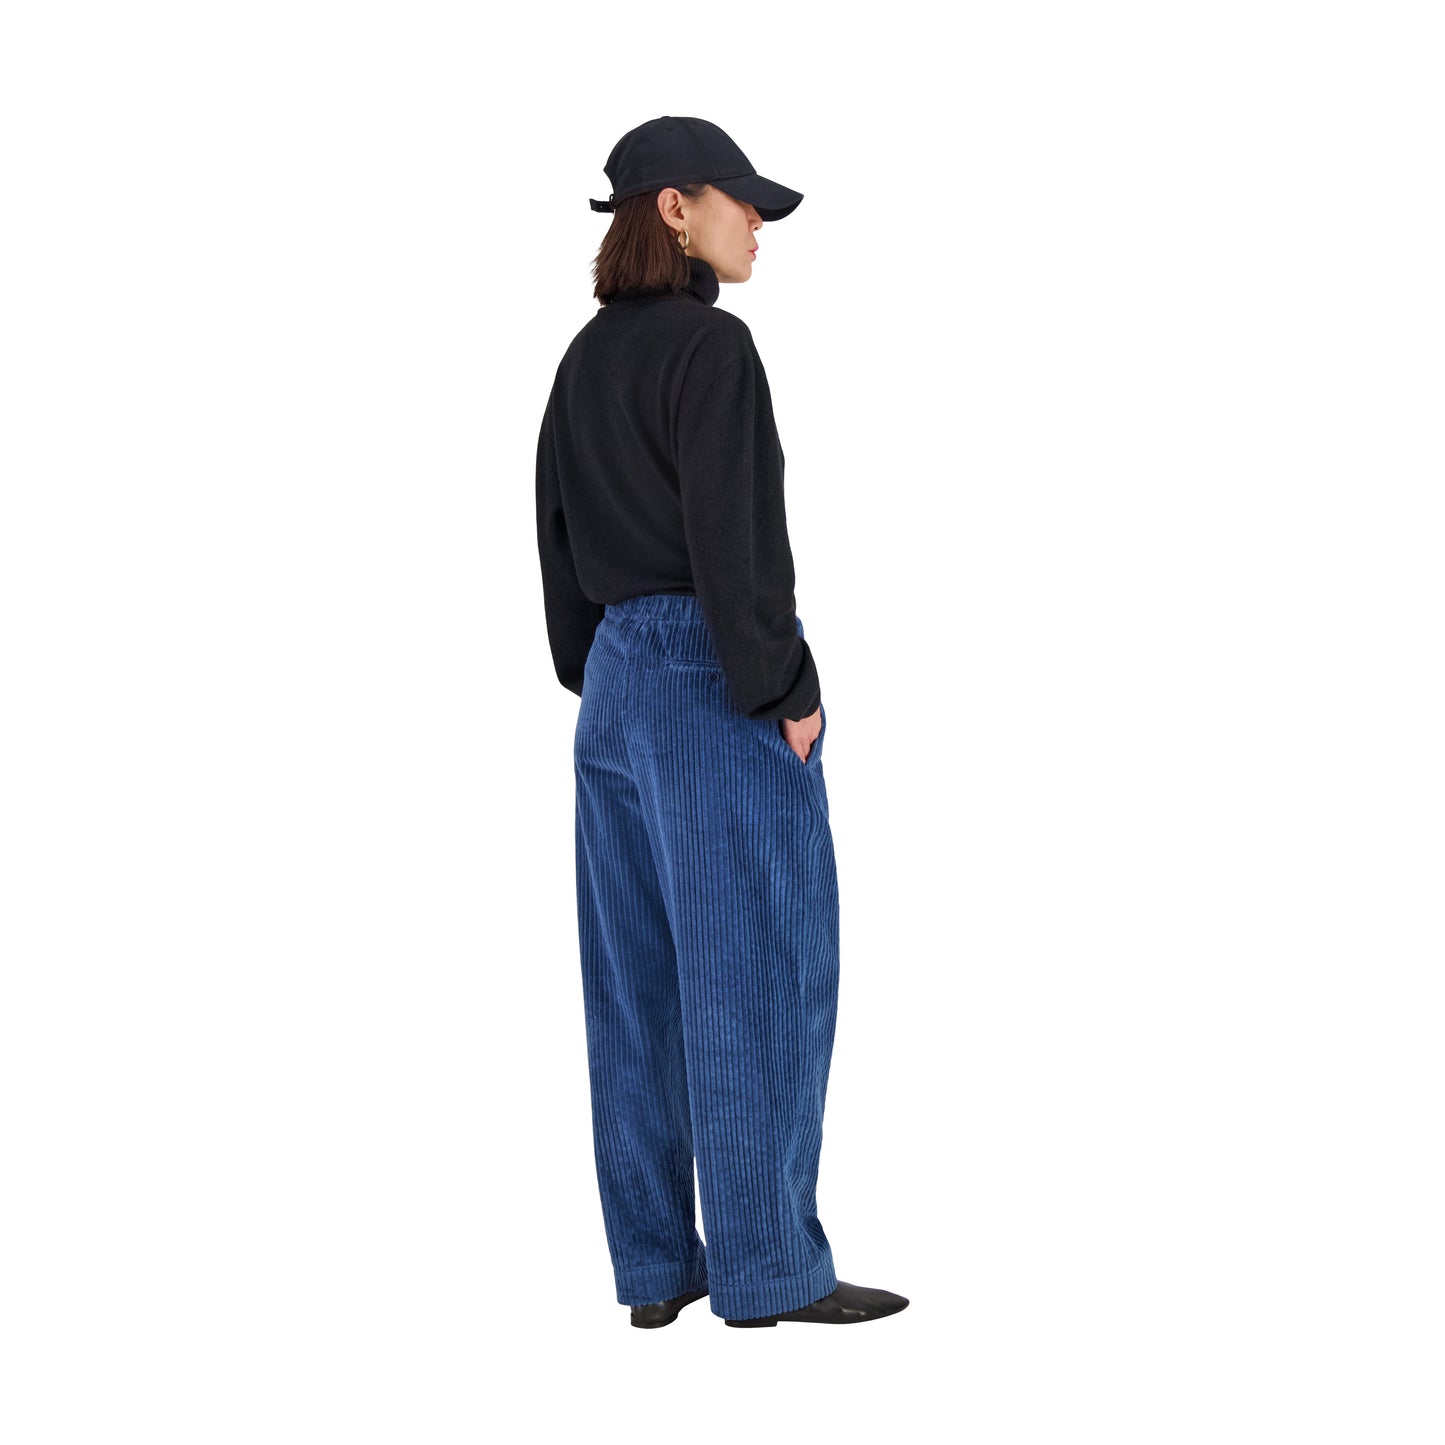 Ed Unlined Exaggerated Cotton Corduroy Drawstring Trousers Airforce Blue